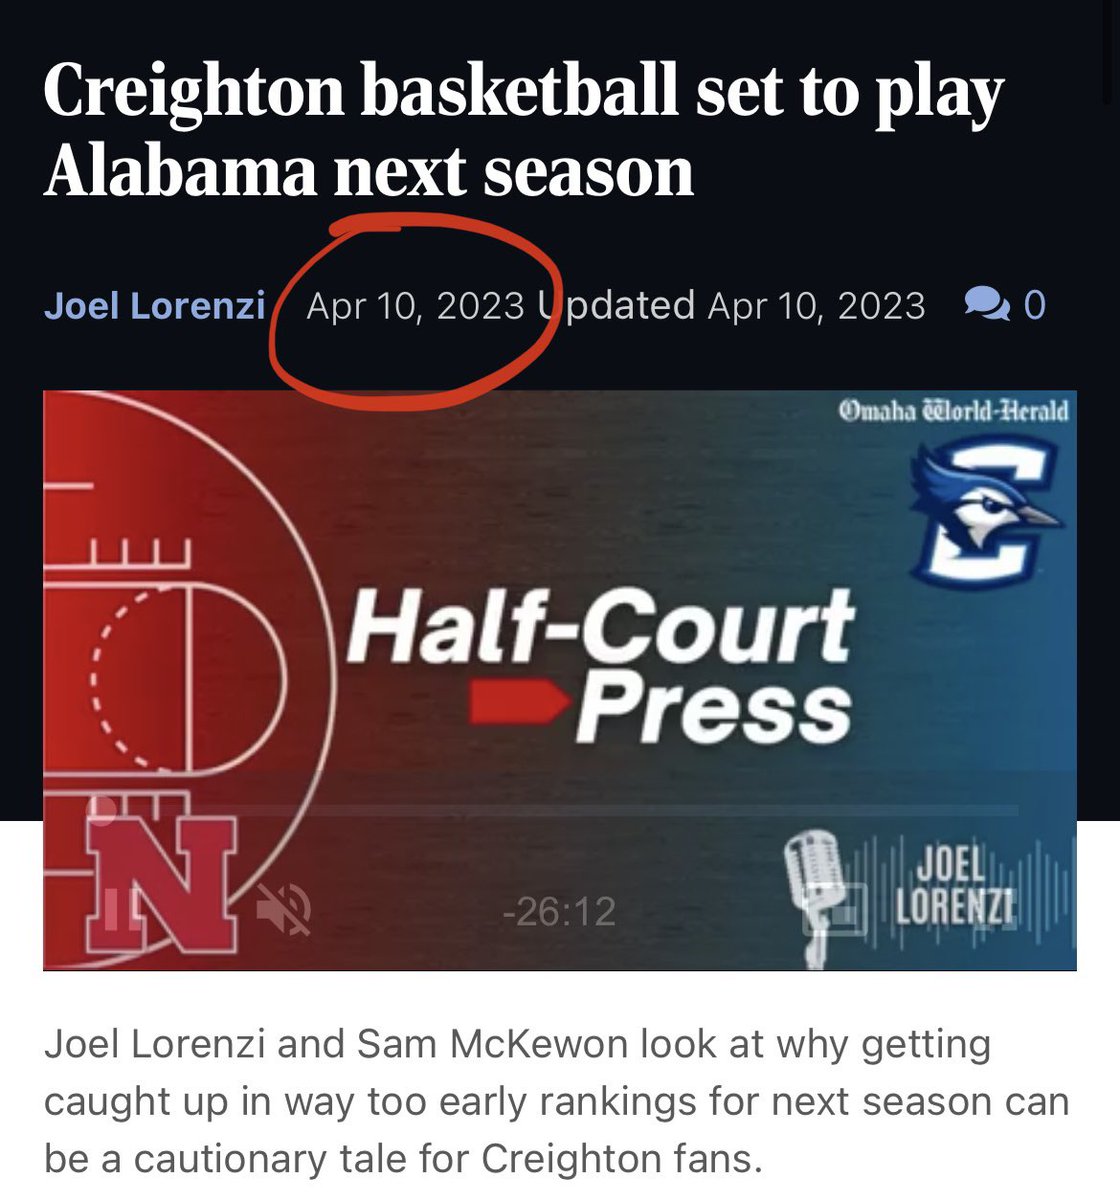 Try again - my guy @jxlorenzi had it reported 3 months ago #LocalJournalism